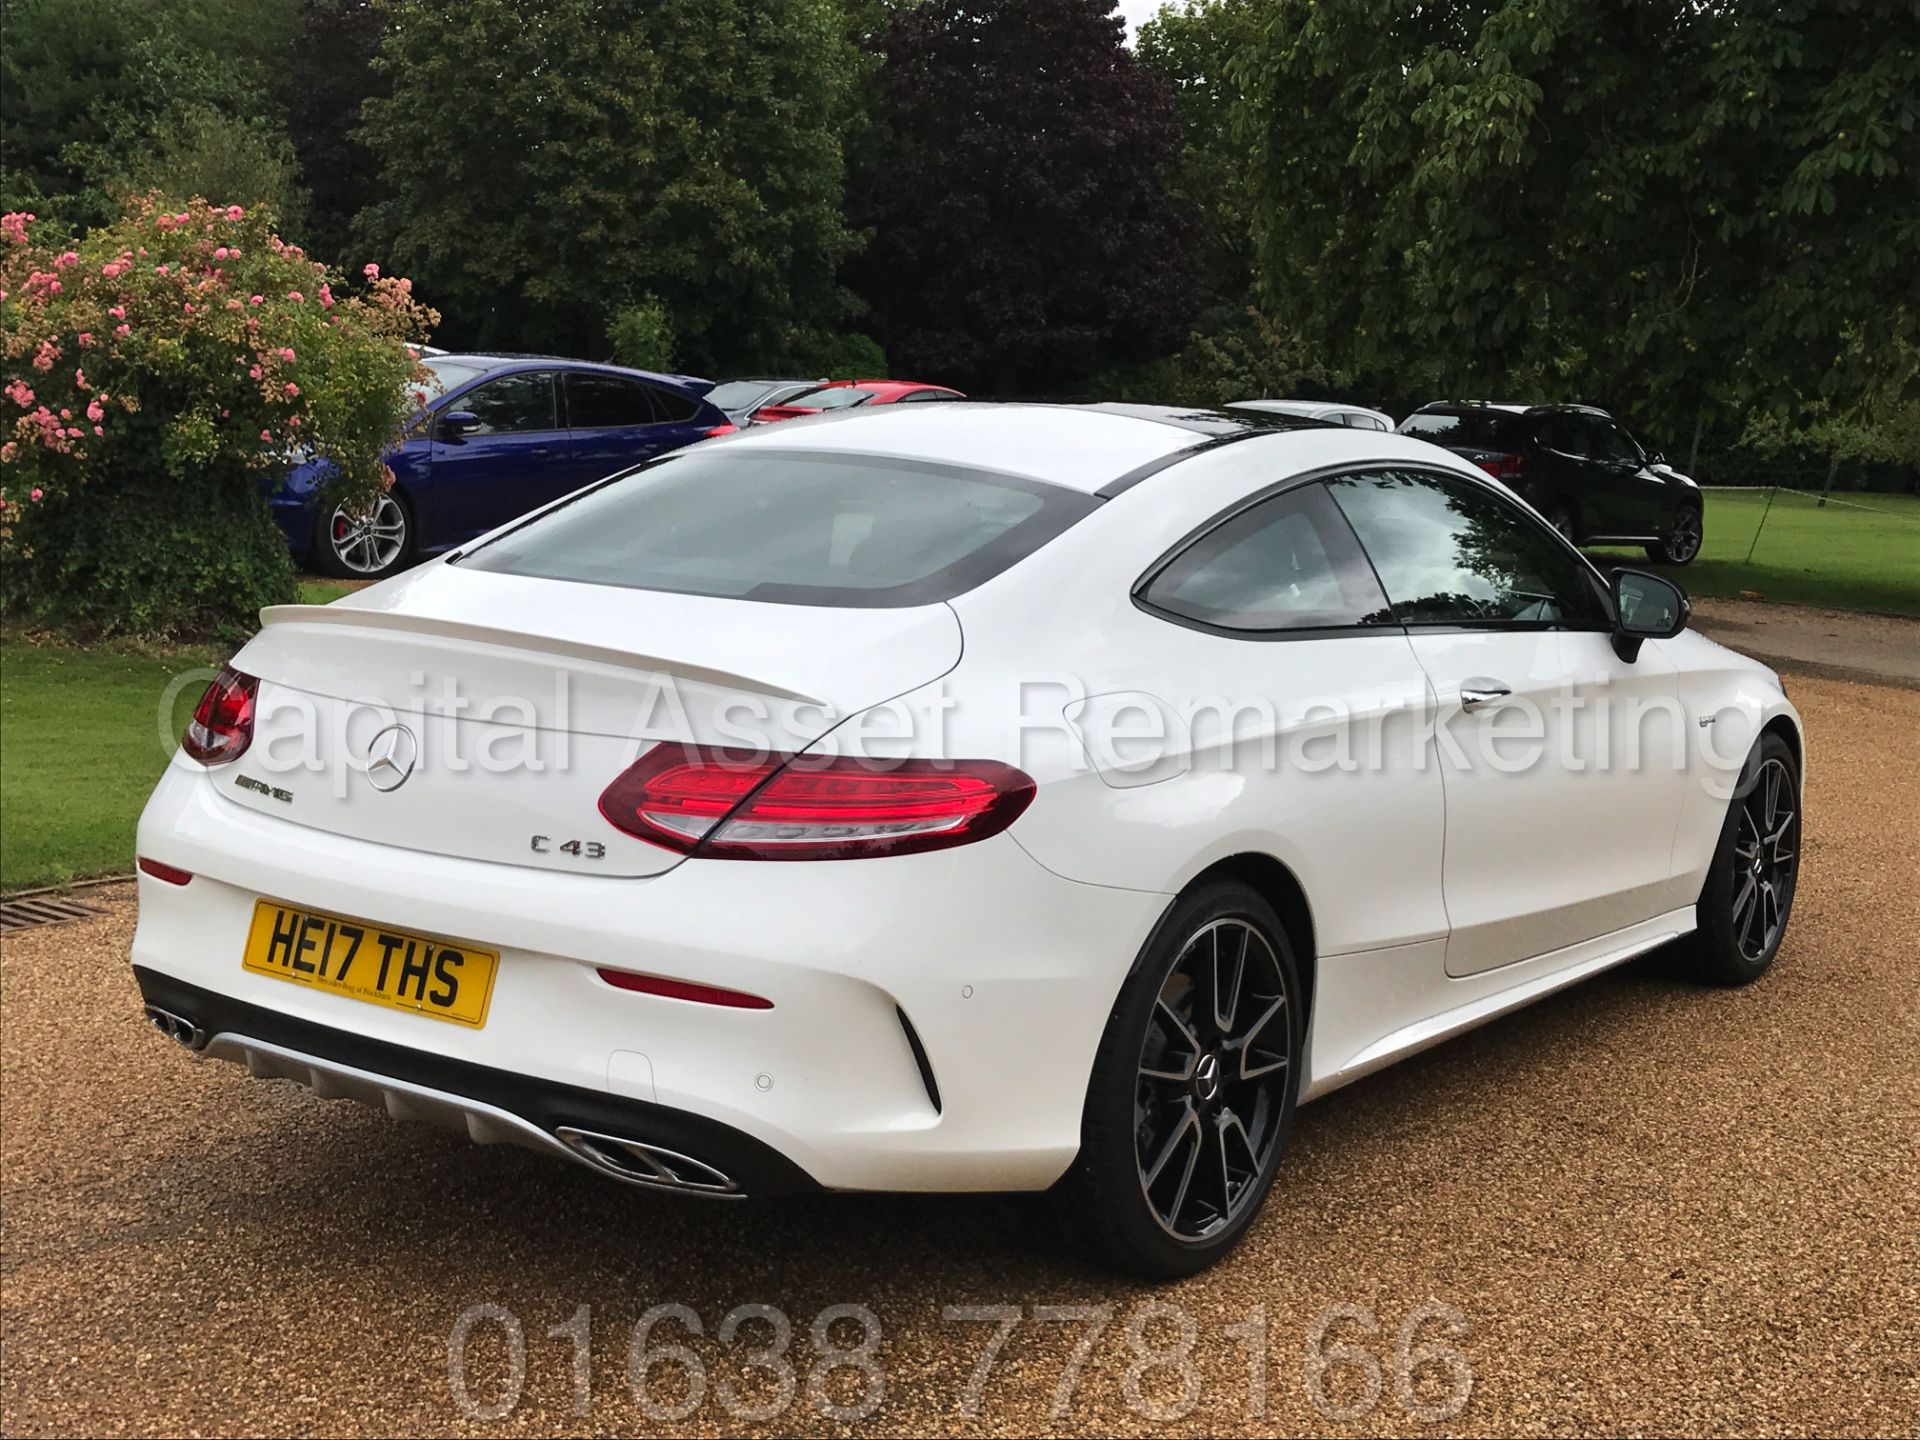 MEREDES-BENZ C43 AMG PREMIUM '4 MATIC' COUPE (2017) '9-G AUTO - LEATHER - SAT NAV' **FULLY LOADED** - Image 17 of 57